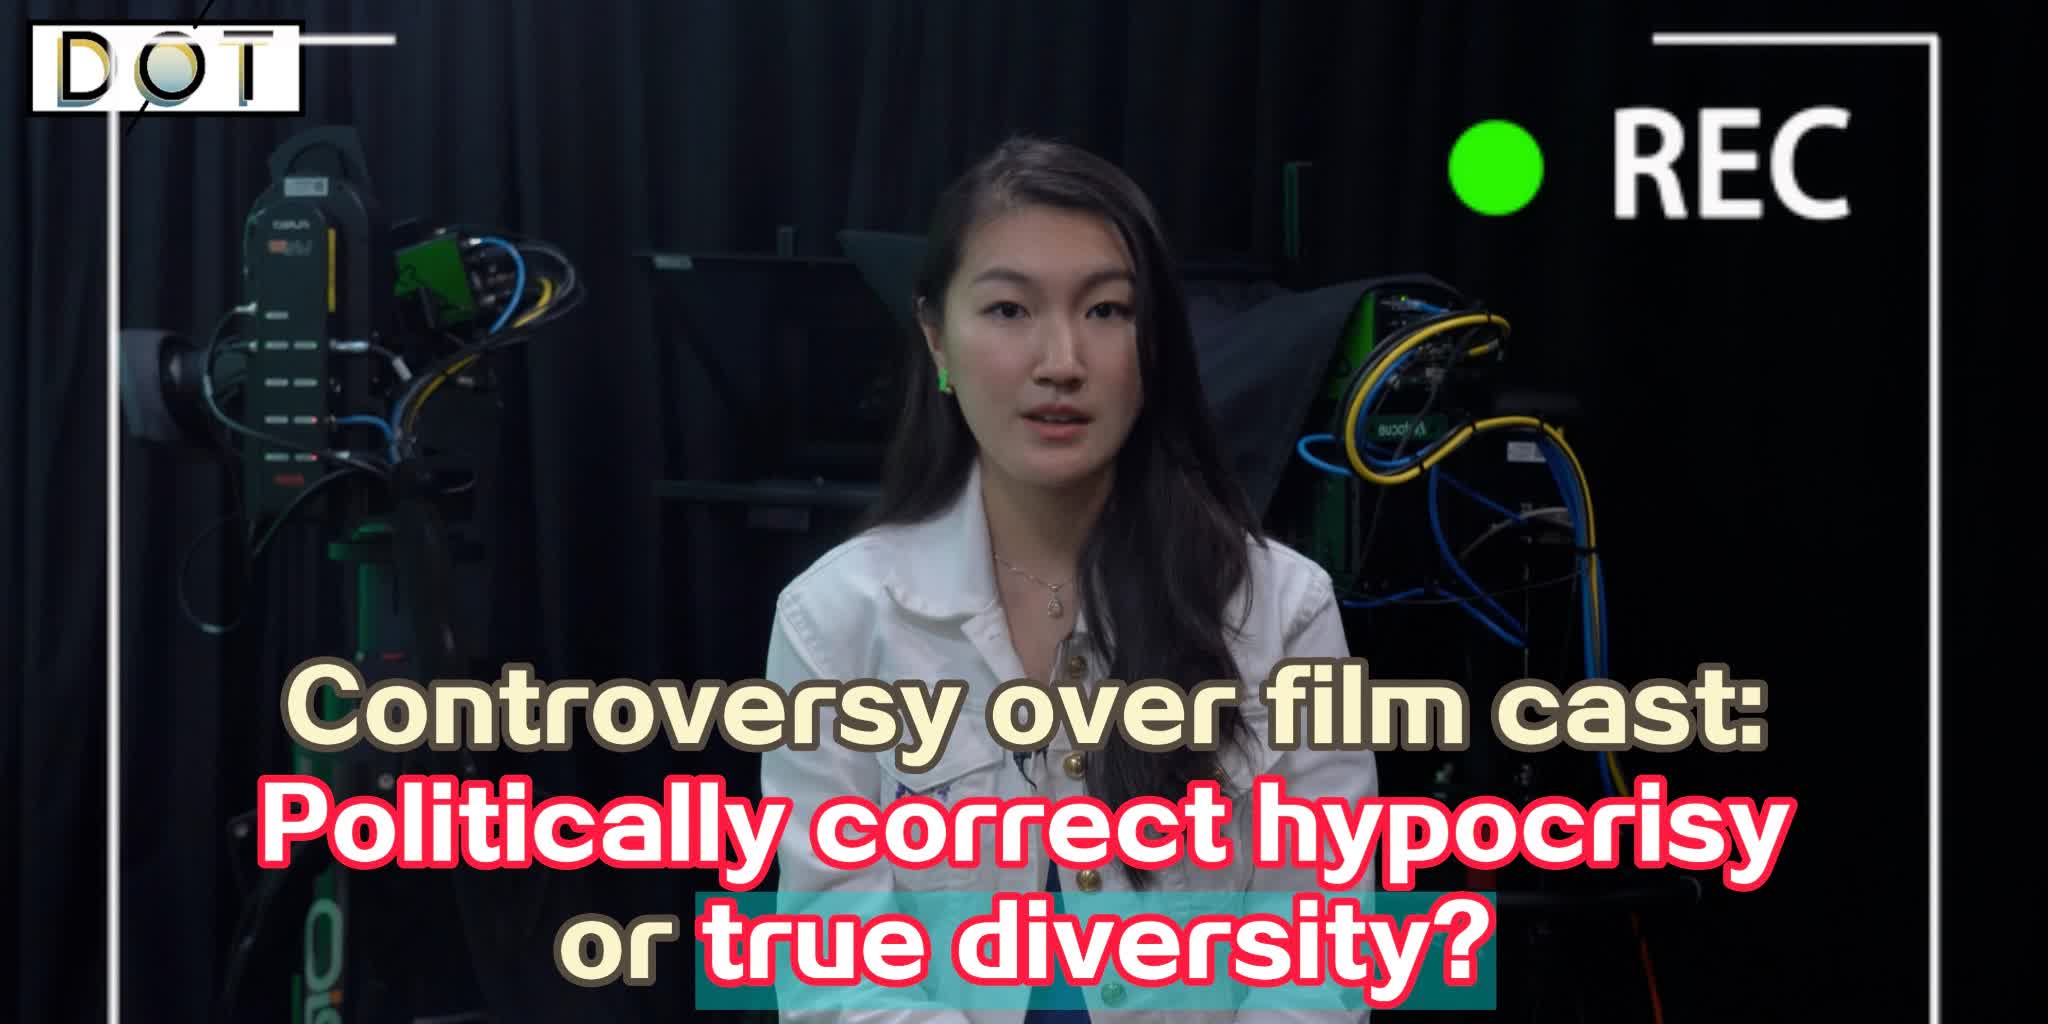 Watch this | Controversy over film cast: Politically correct hypocrisy or true diversity?